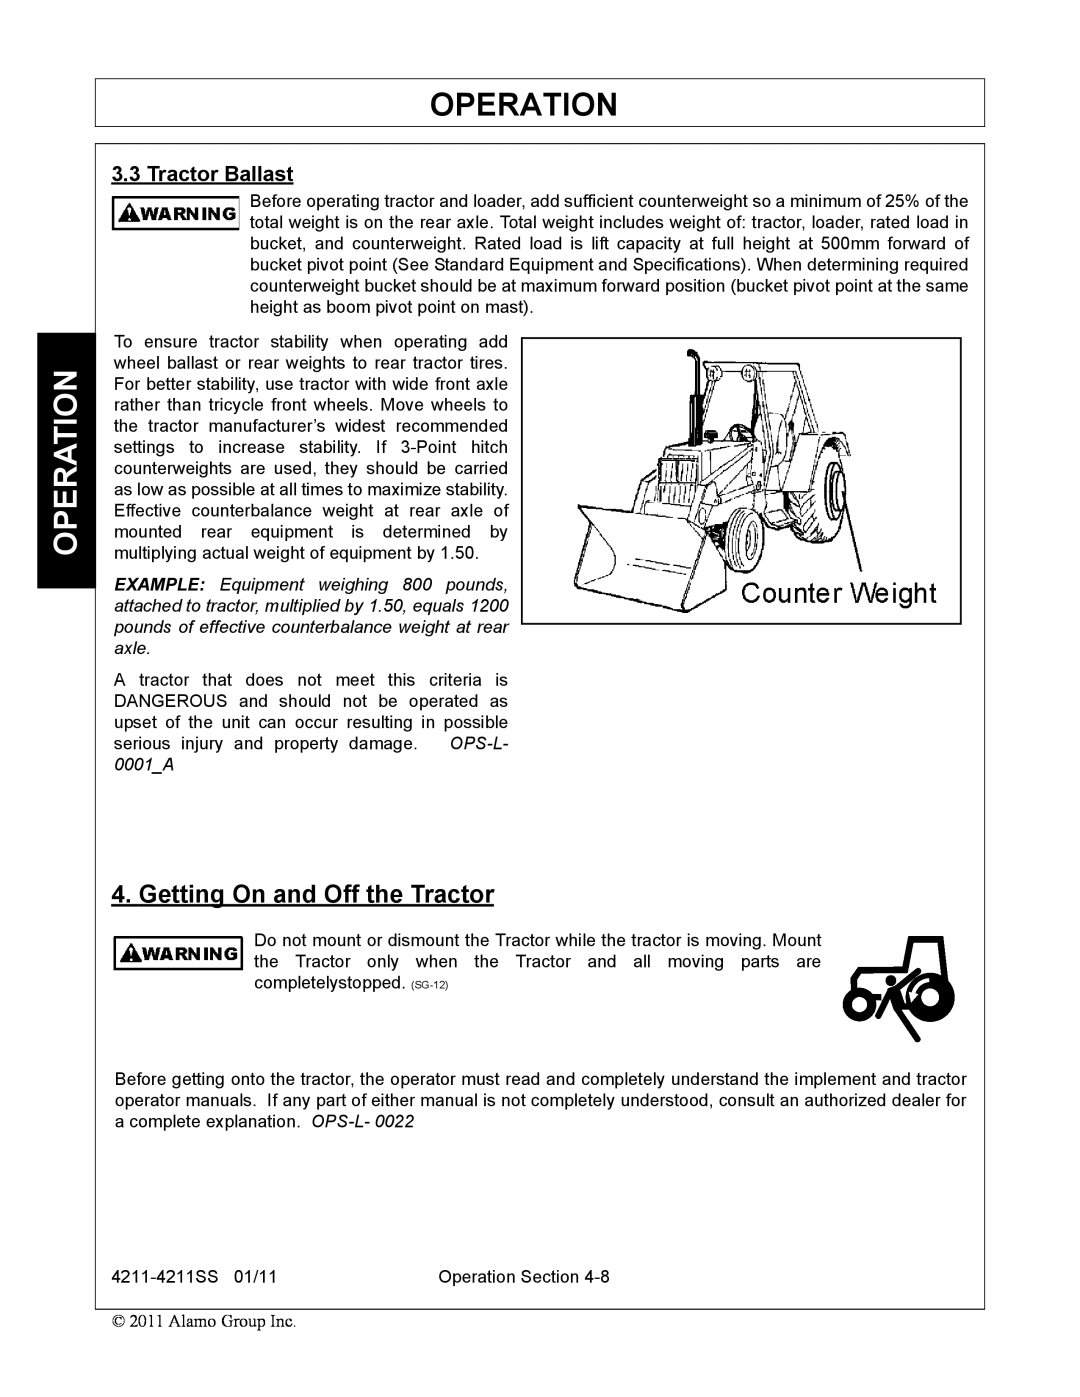 Servis-Rhino 4211SS manual Operation, Getting On and Off the Tractor, Tractor Ballast 